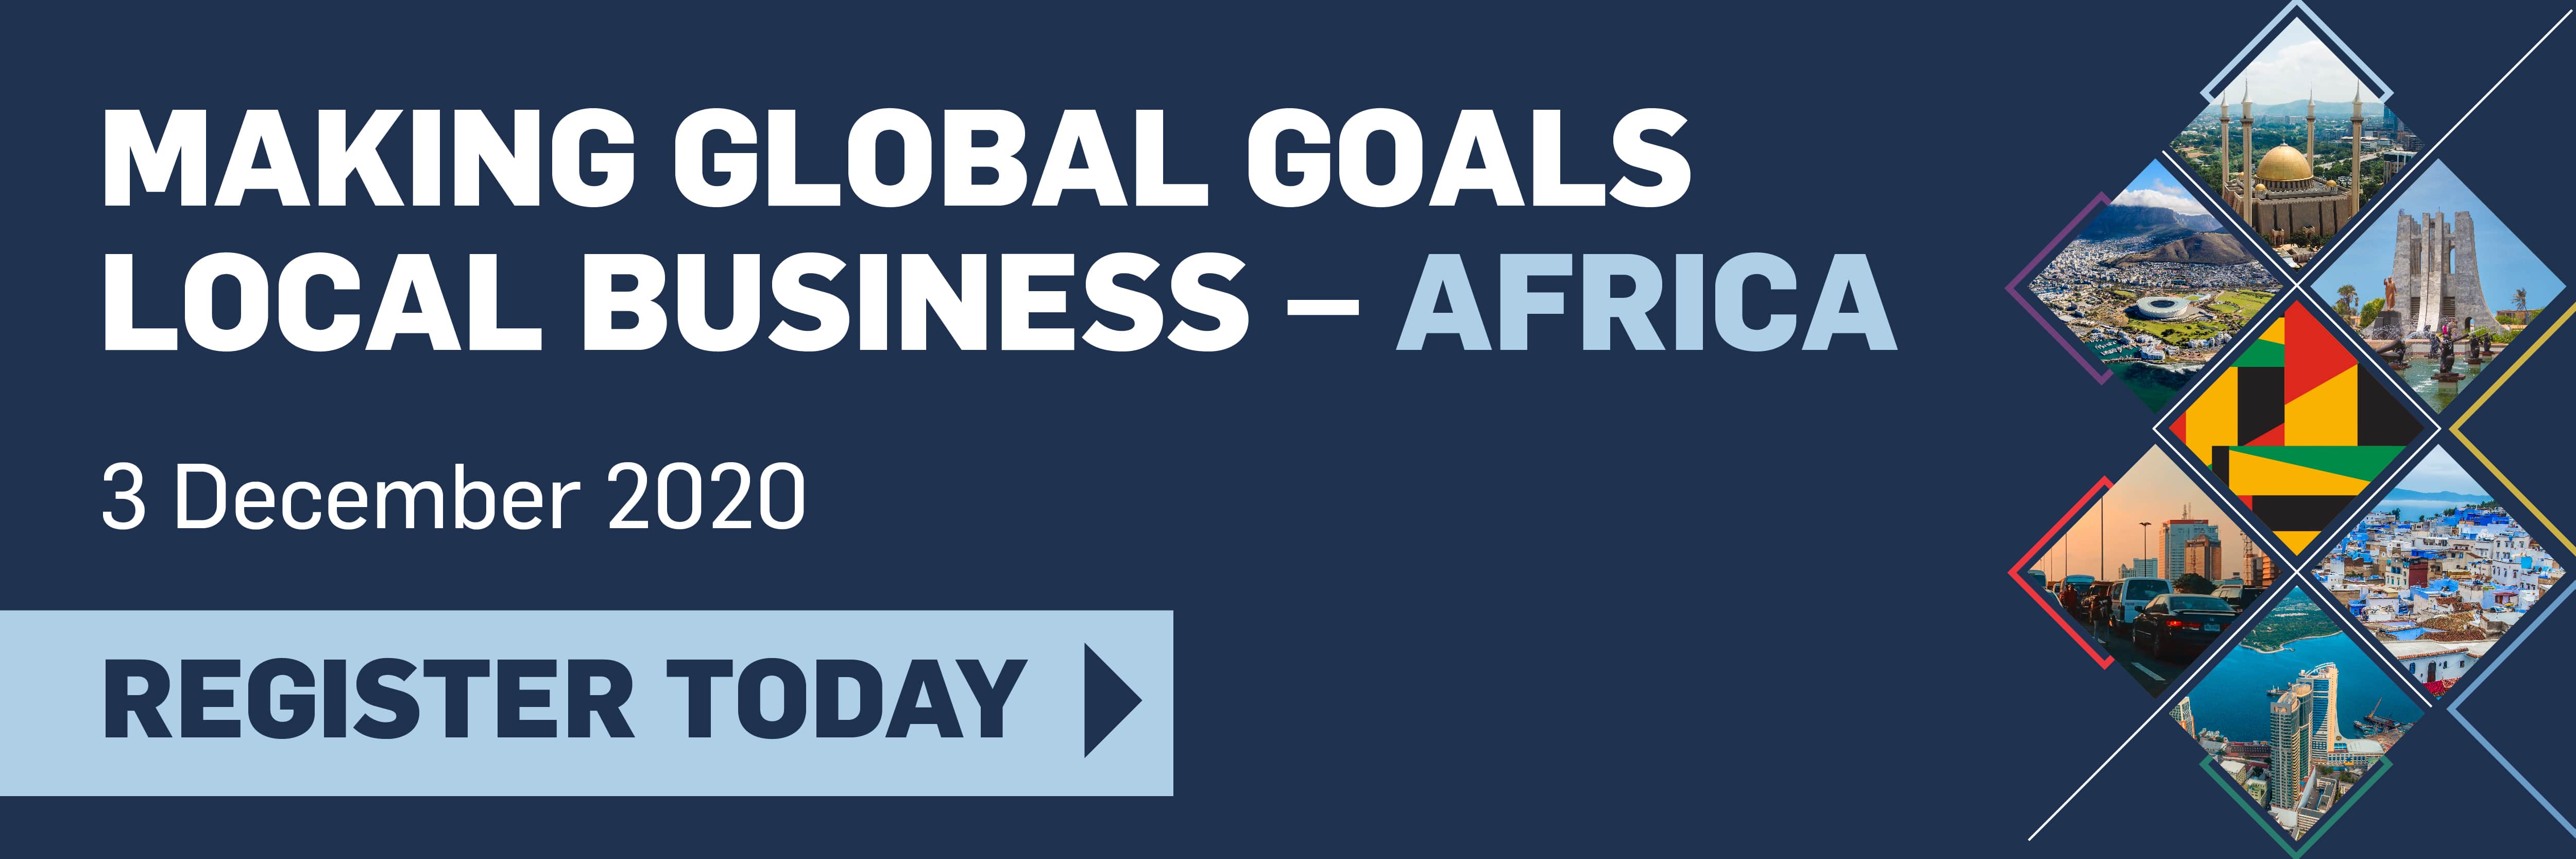 Making Global Goals Local Business Africa